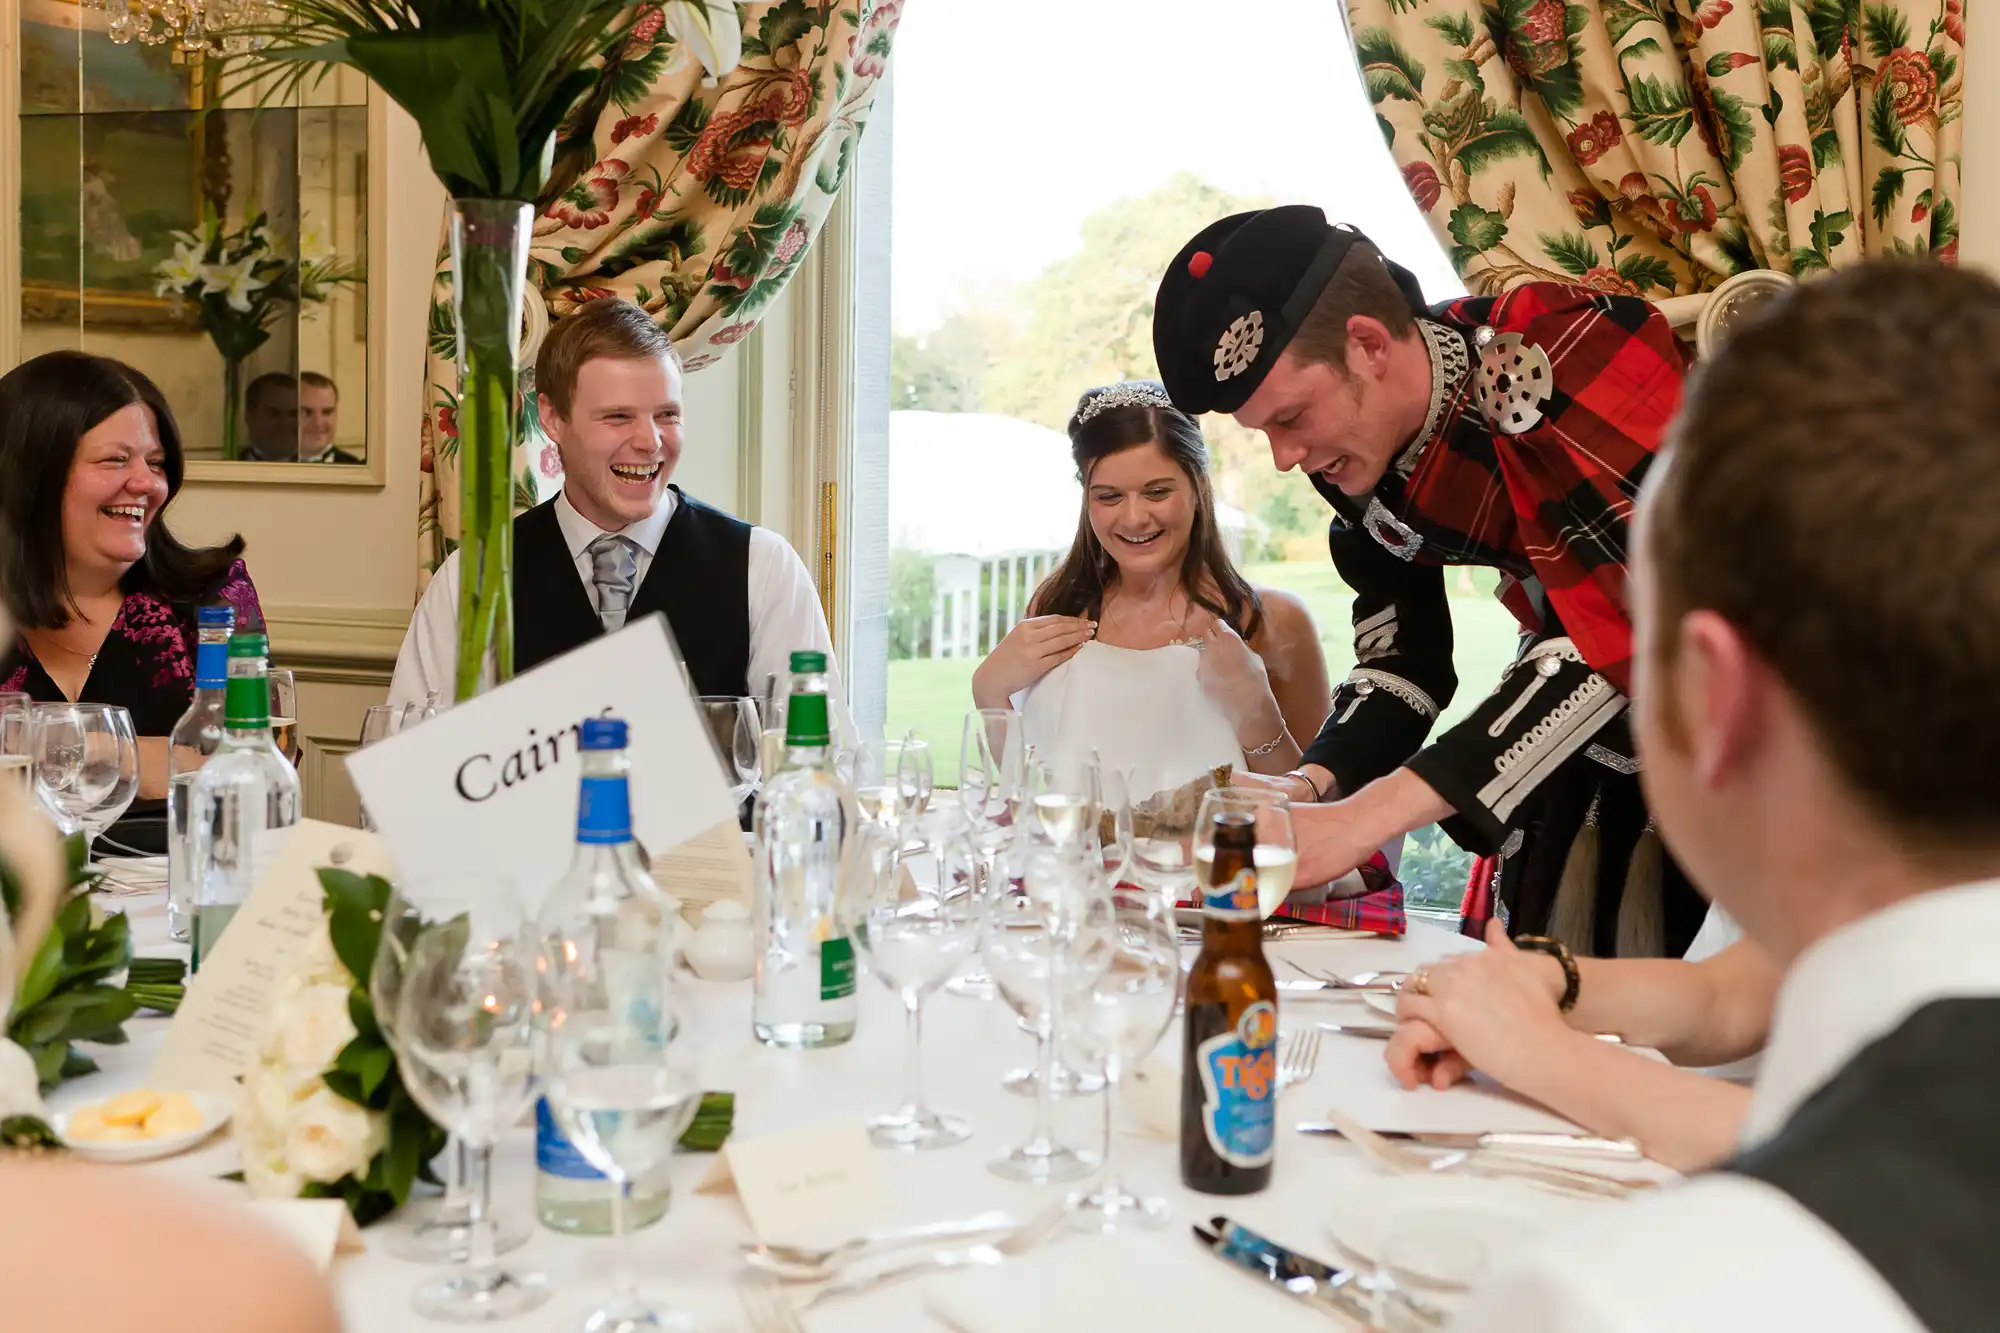 A man in traditional scottish attire interacts with guests at a wedding reception, causing laughter around a dining table.